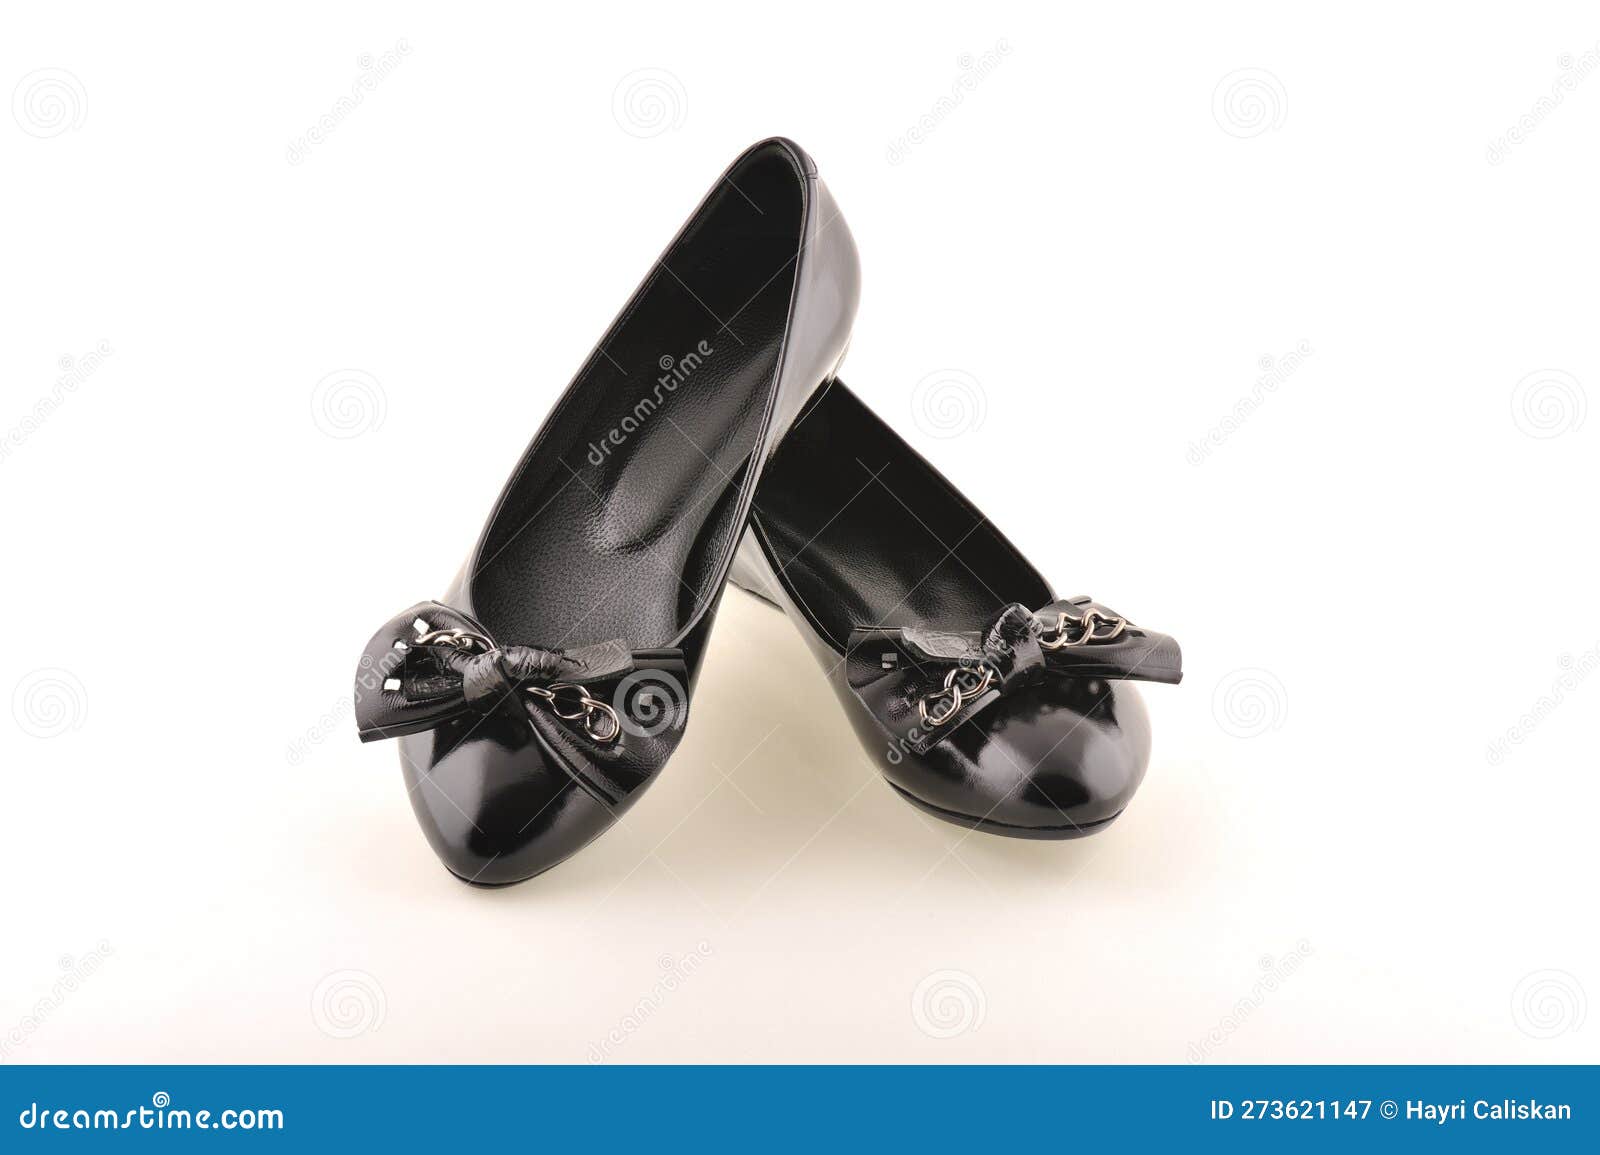 Women S Black Shoes Made of Leather with Bow Stock Image - Image of ...